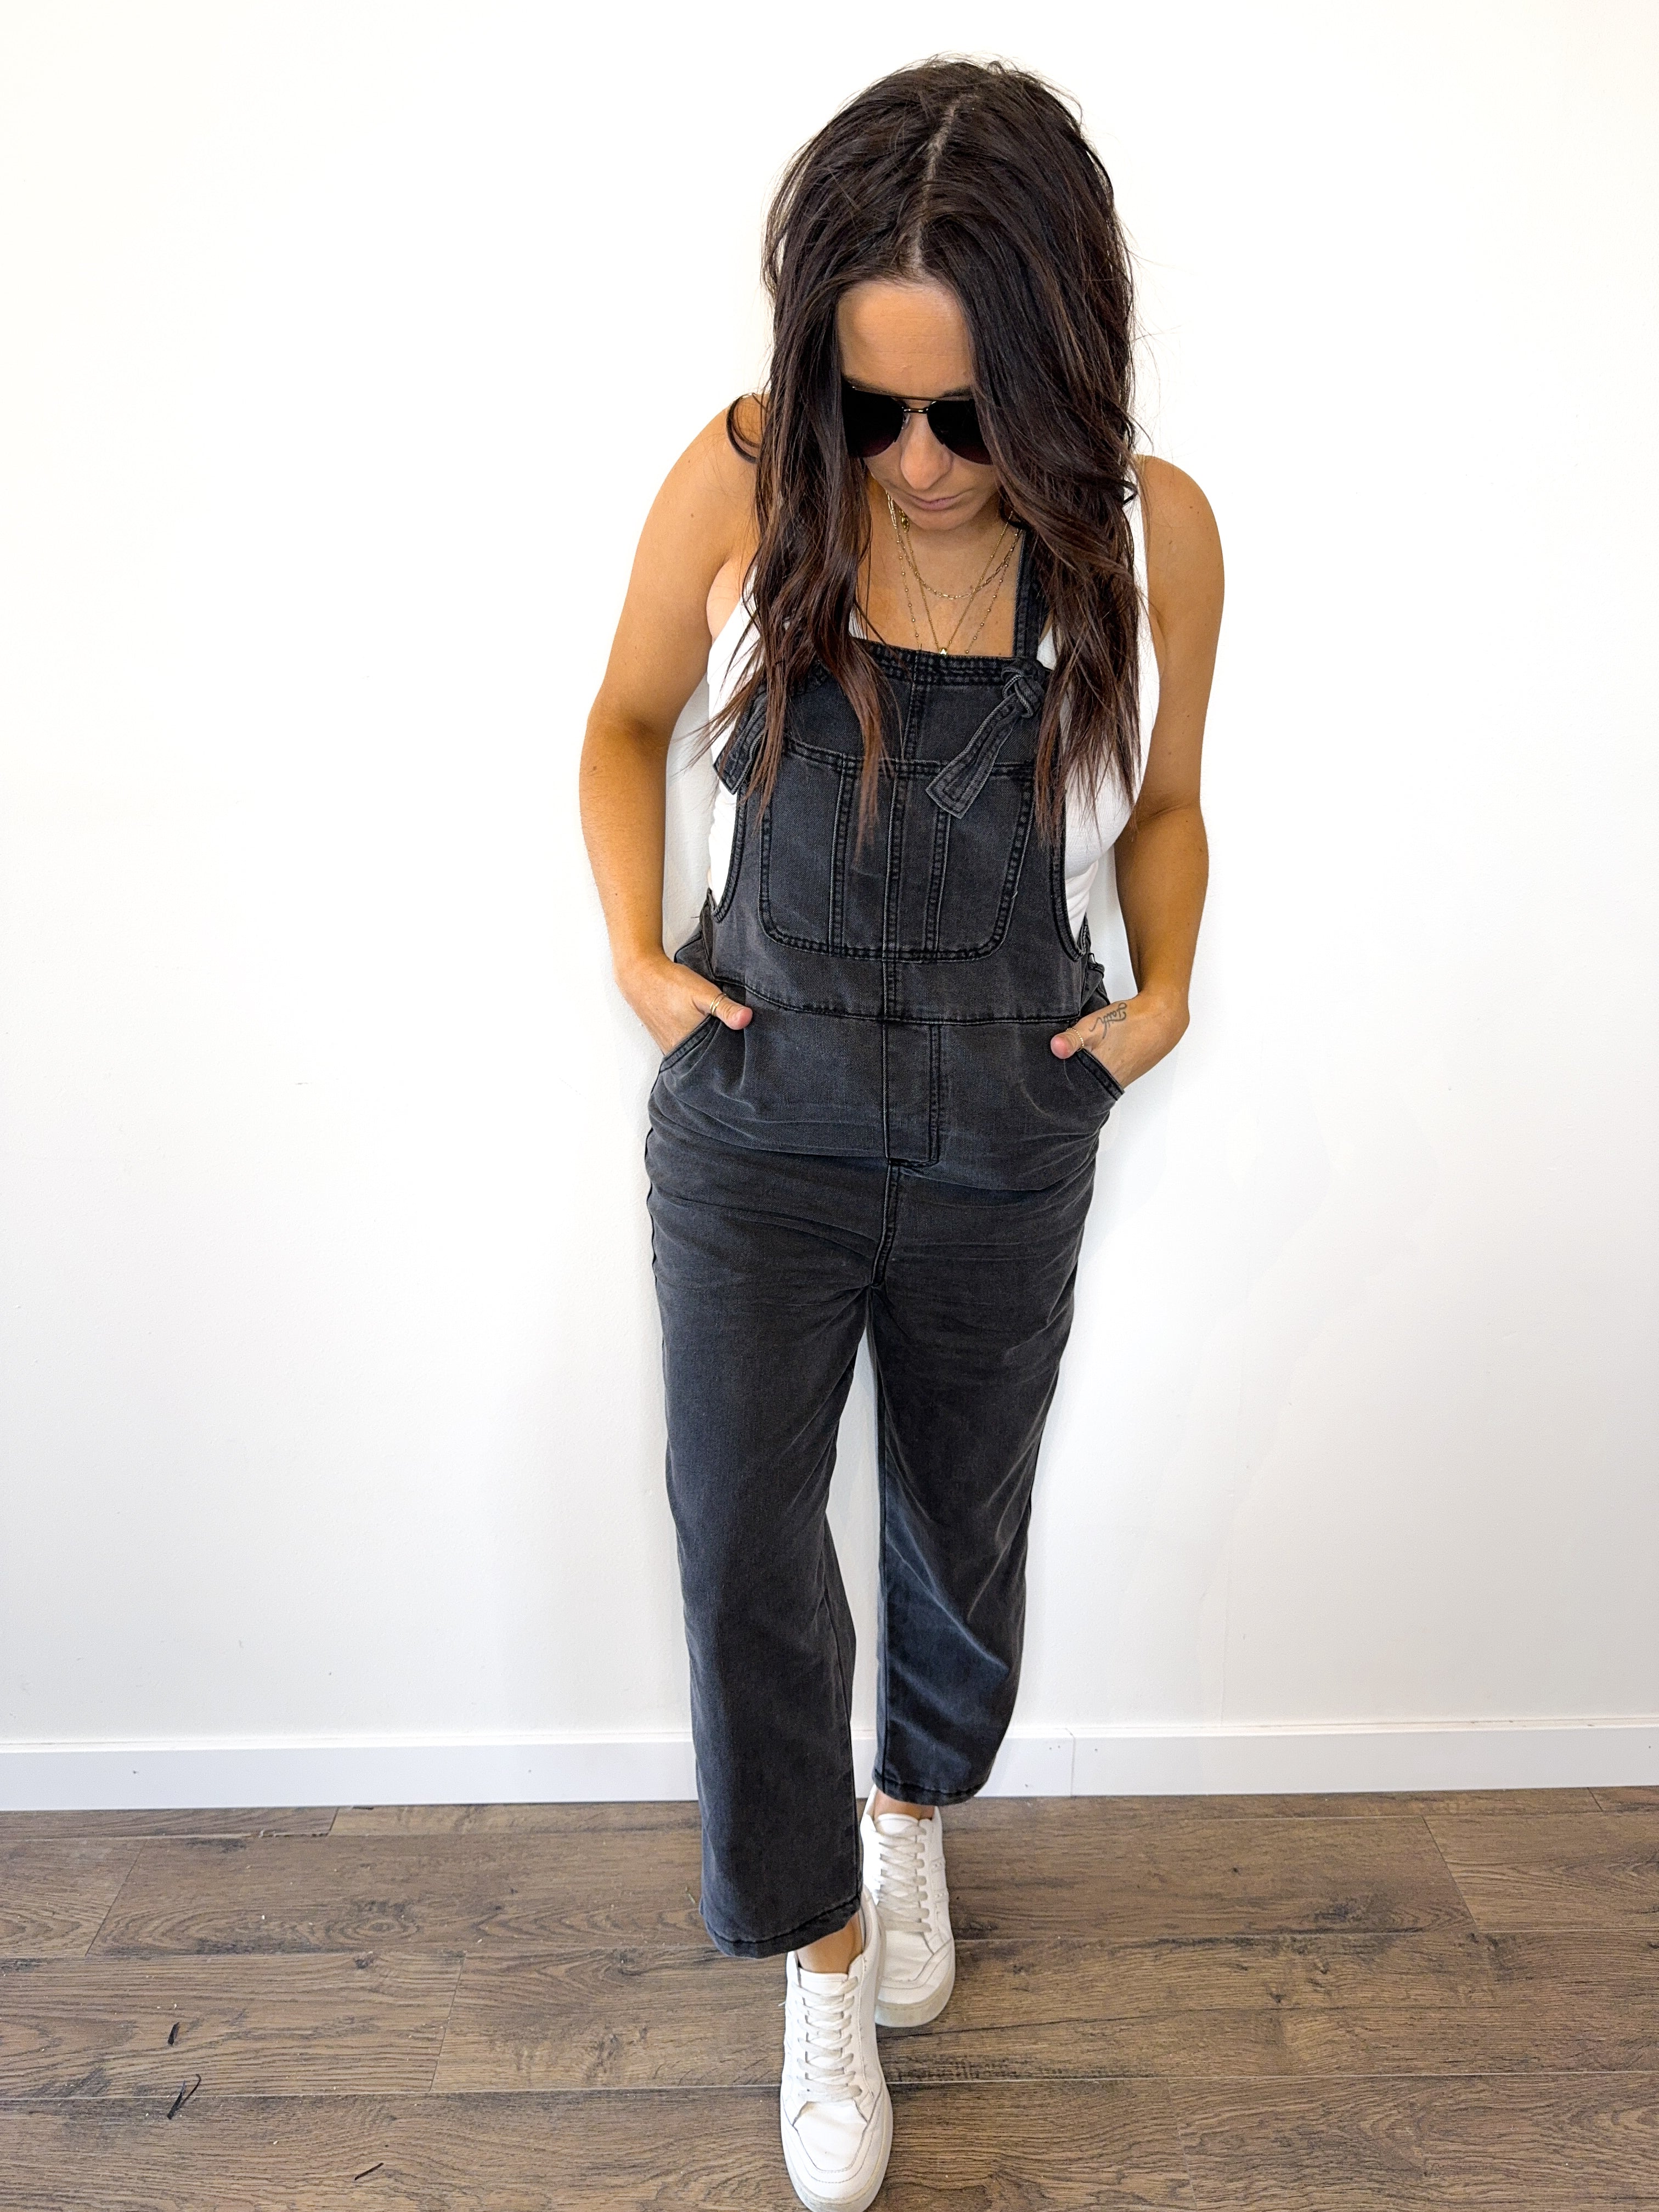 This Town's Been Too Good to Us Knotted Black Denim Jumpsuit